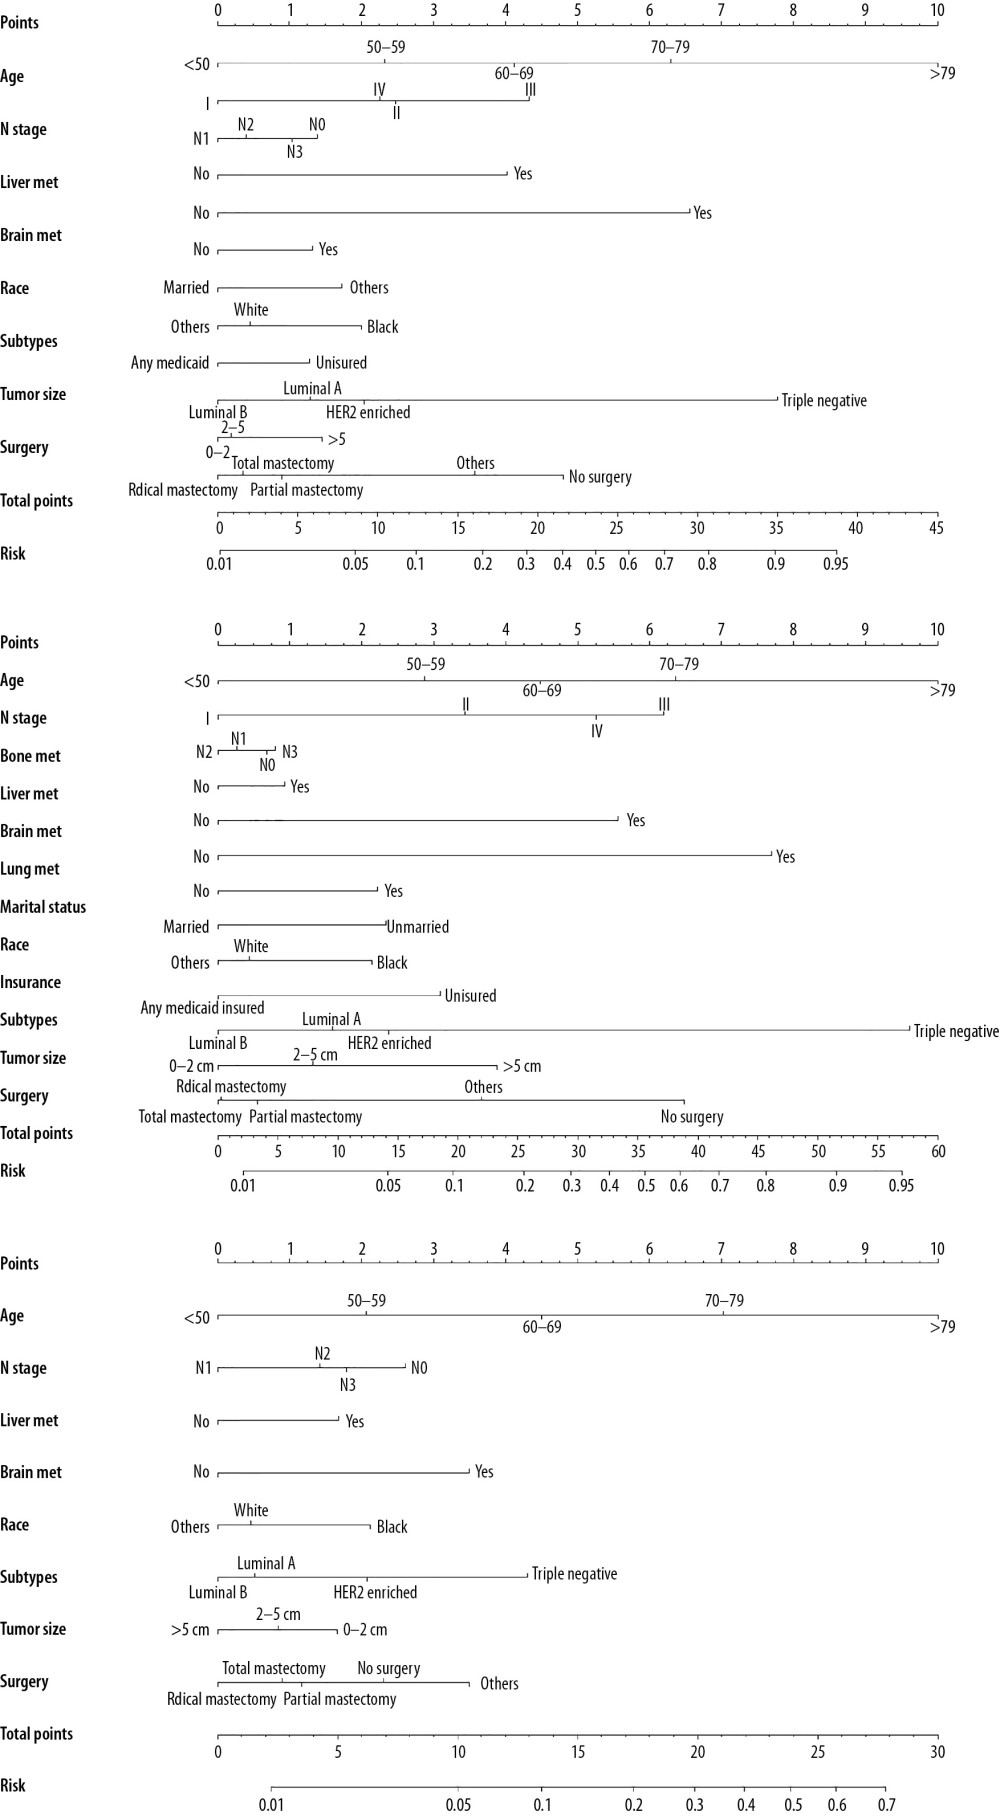 Nomograms for predicting (A) all-cause early death; (B) cancer-specific early death and (C) non-cancer-specific early death in stage IV breast cancer patients.